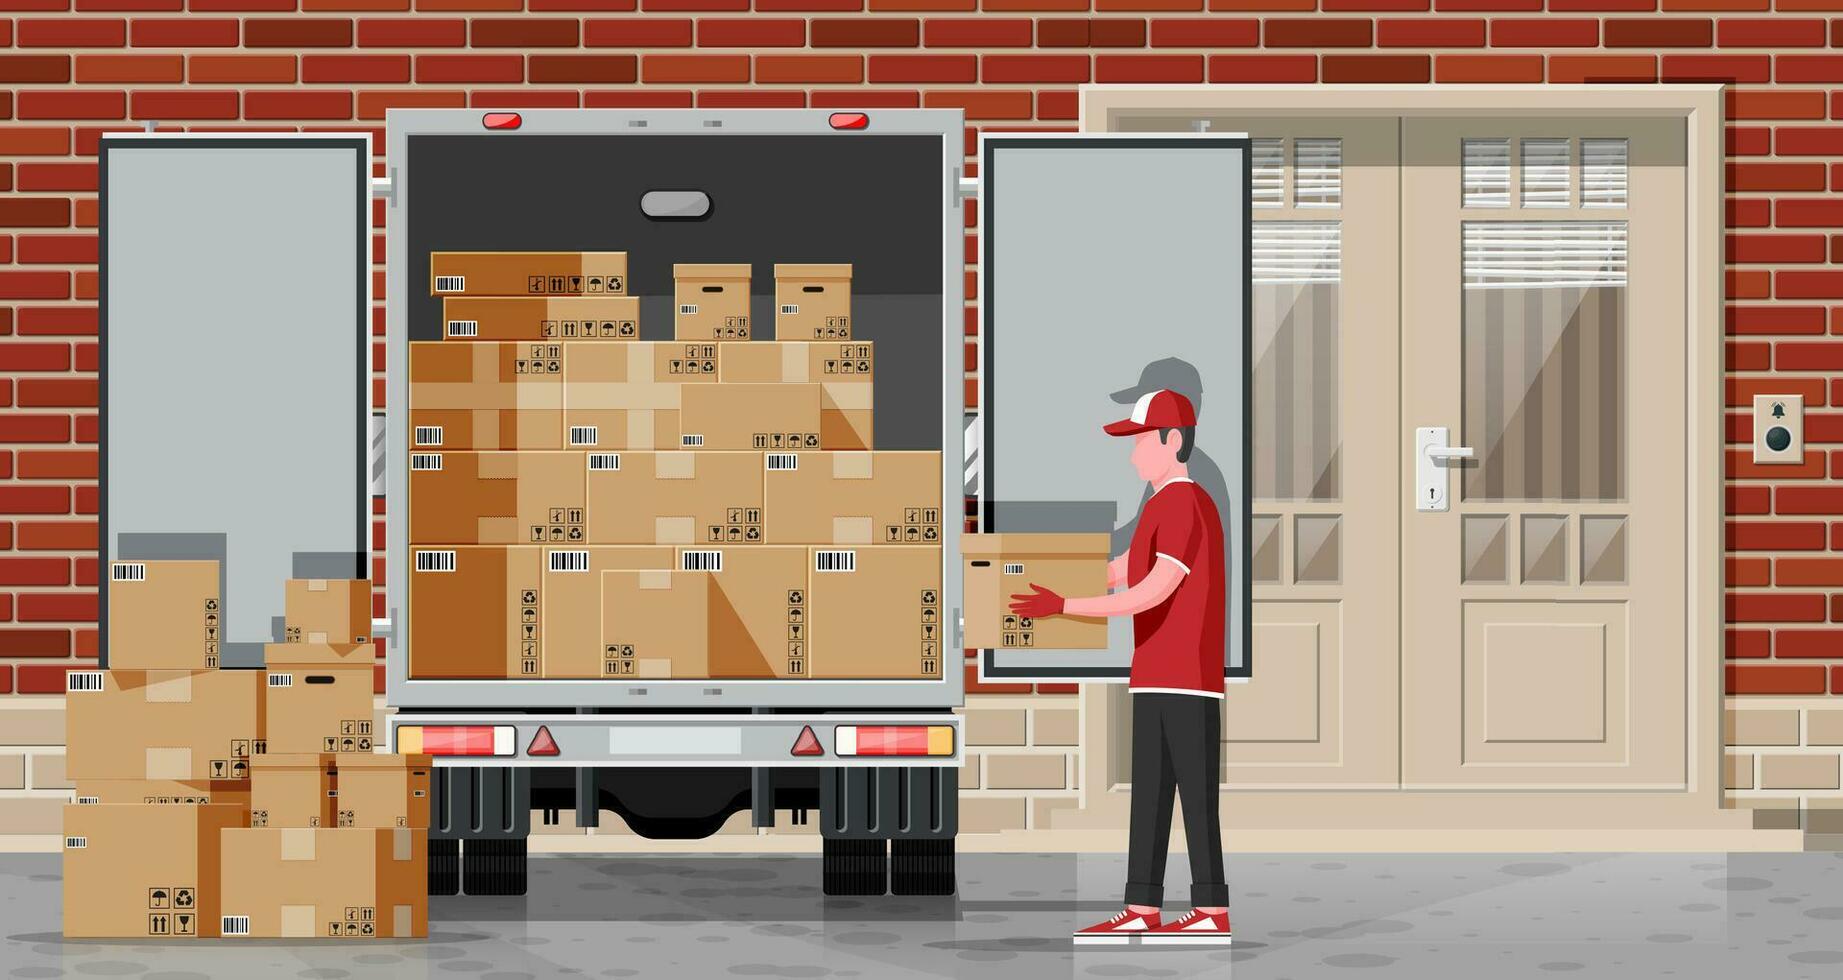 Loader unloads the goods from truck. Fast and free delivery service in city. Courier with parcel box. Male mover, paper cardboard boxes with goods. Cargo and logistic. Cartoon flat vector illustration